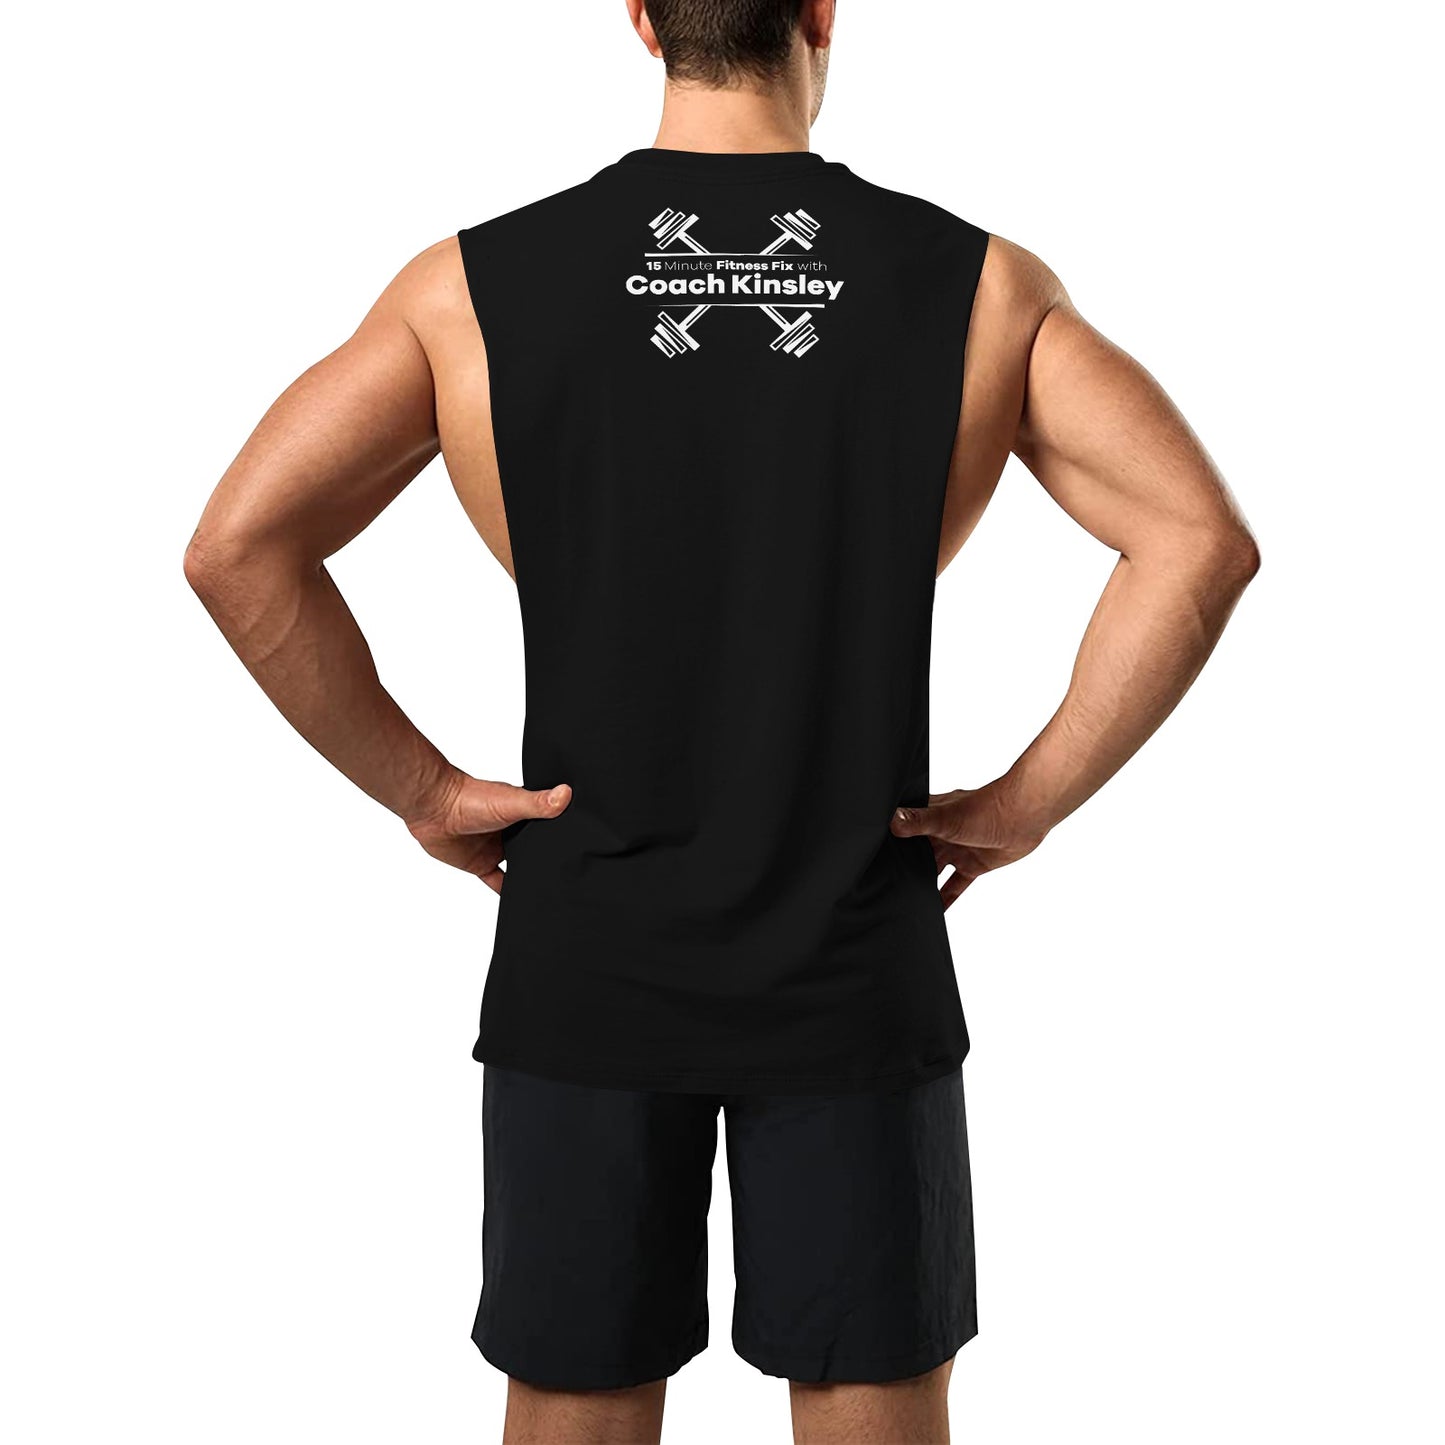 Workout Tank Top - open sides